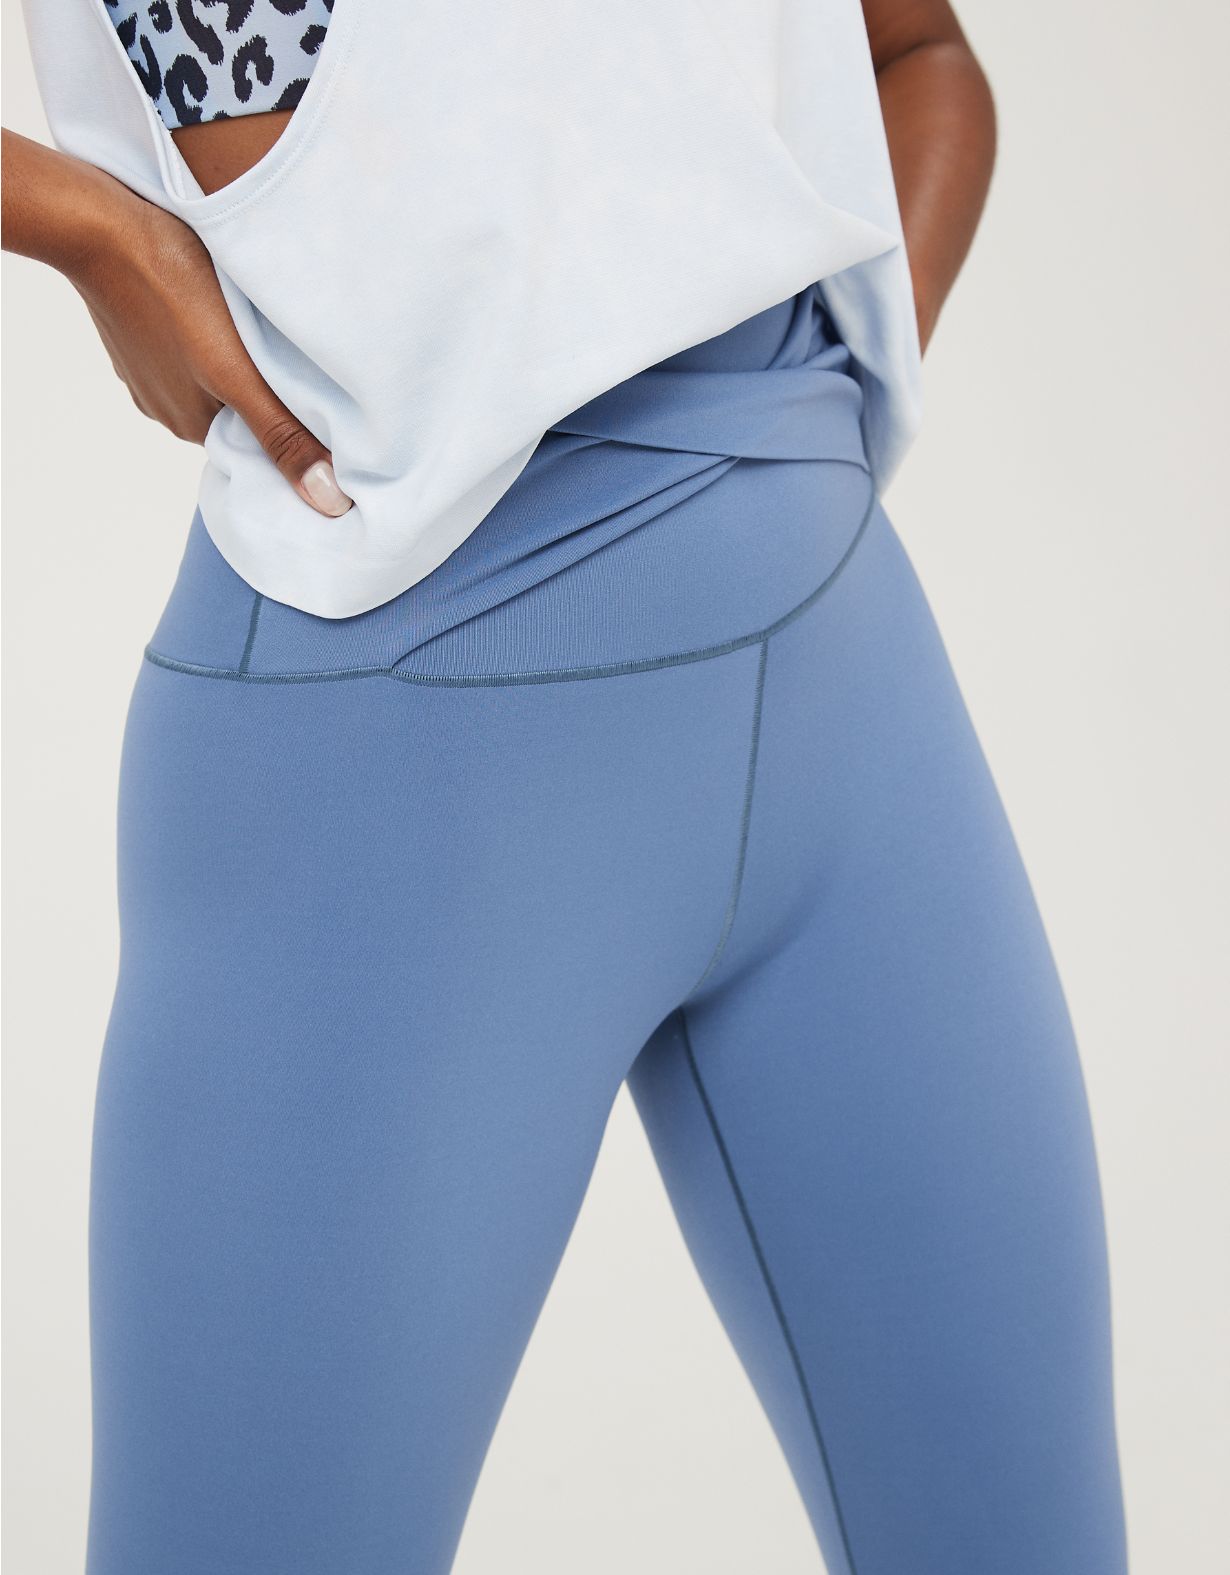 OFFLINE By Aerie Real Me High Waisted Twist Legging